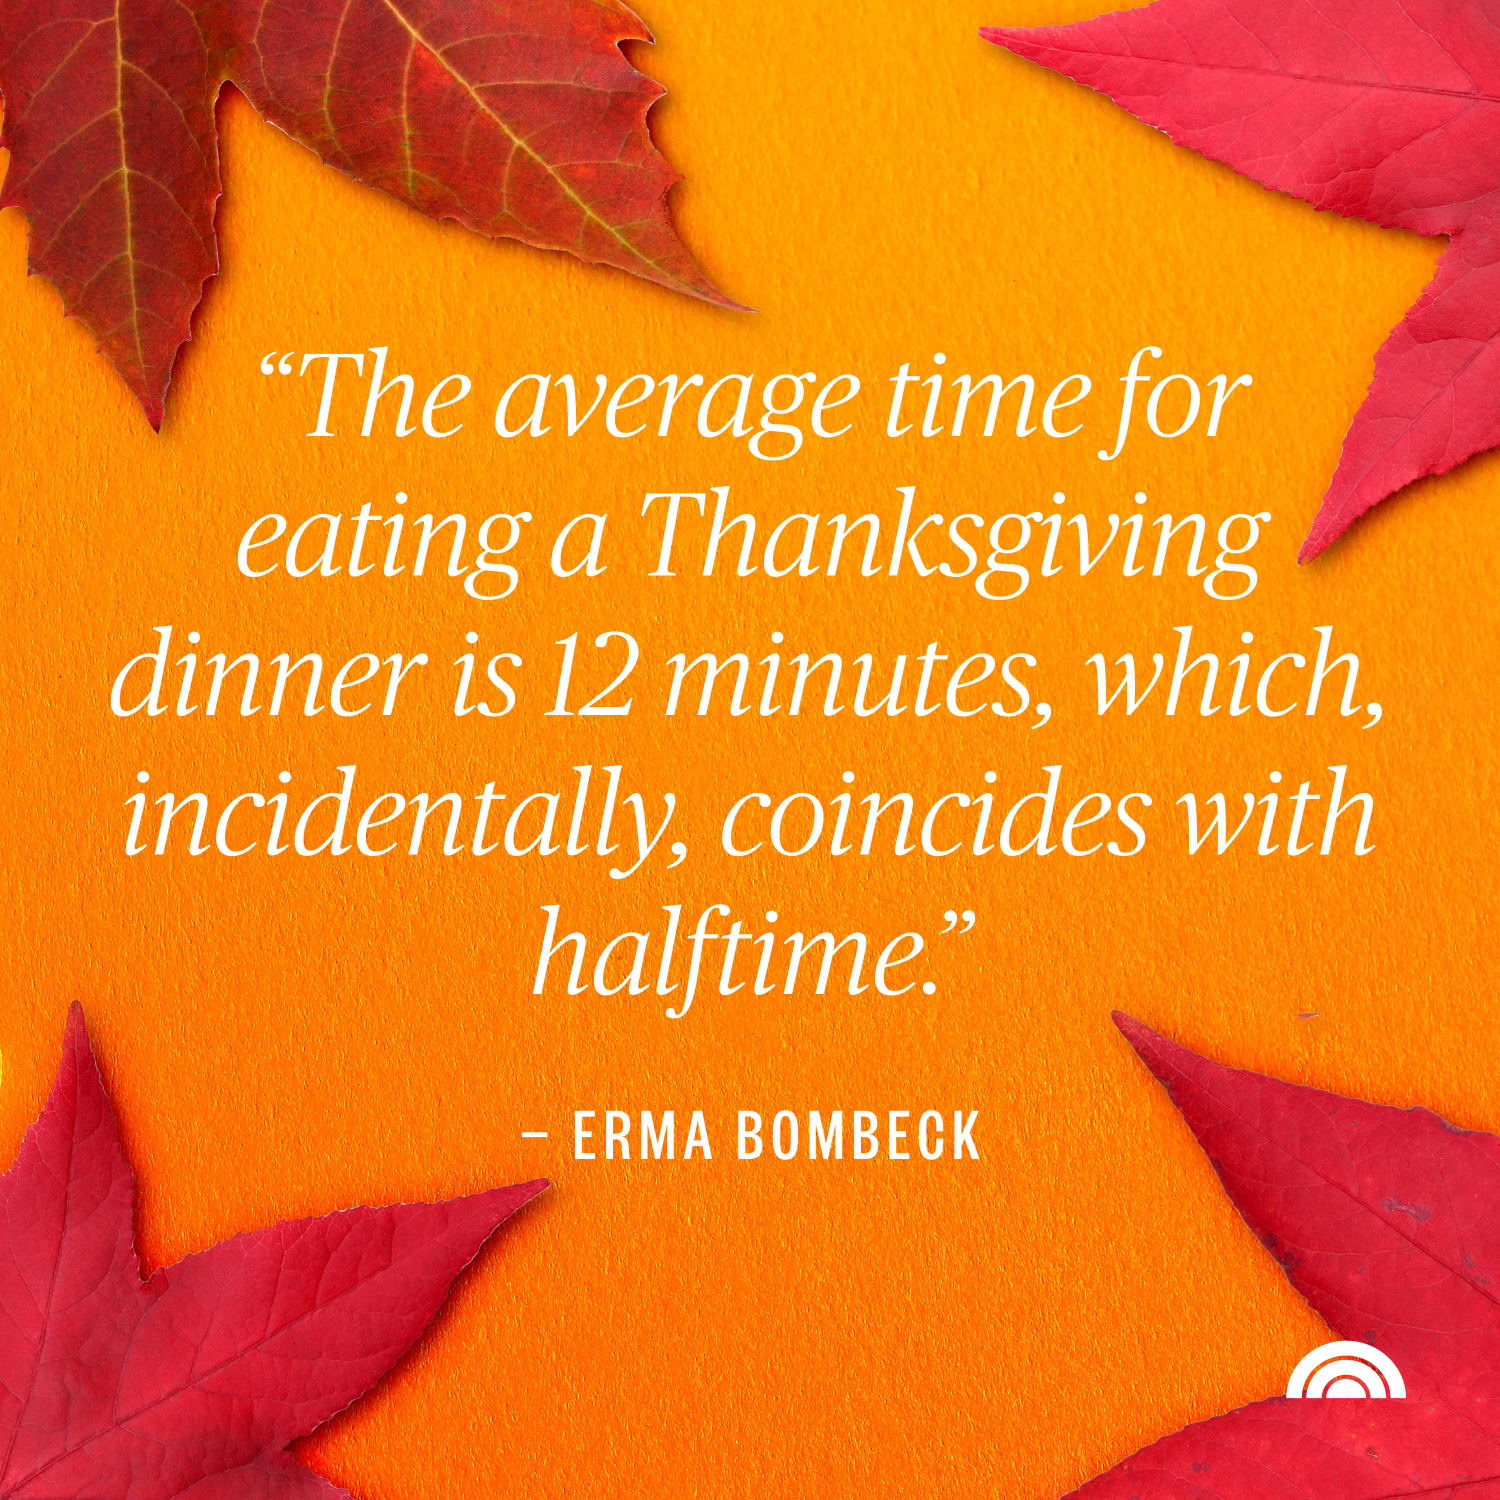 50 Funny Thanksgiving Quotes - Short and Silly Quotes About Thanksgiving